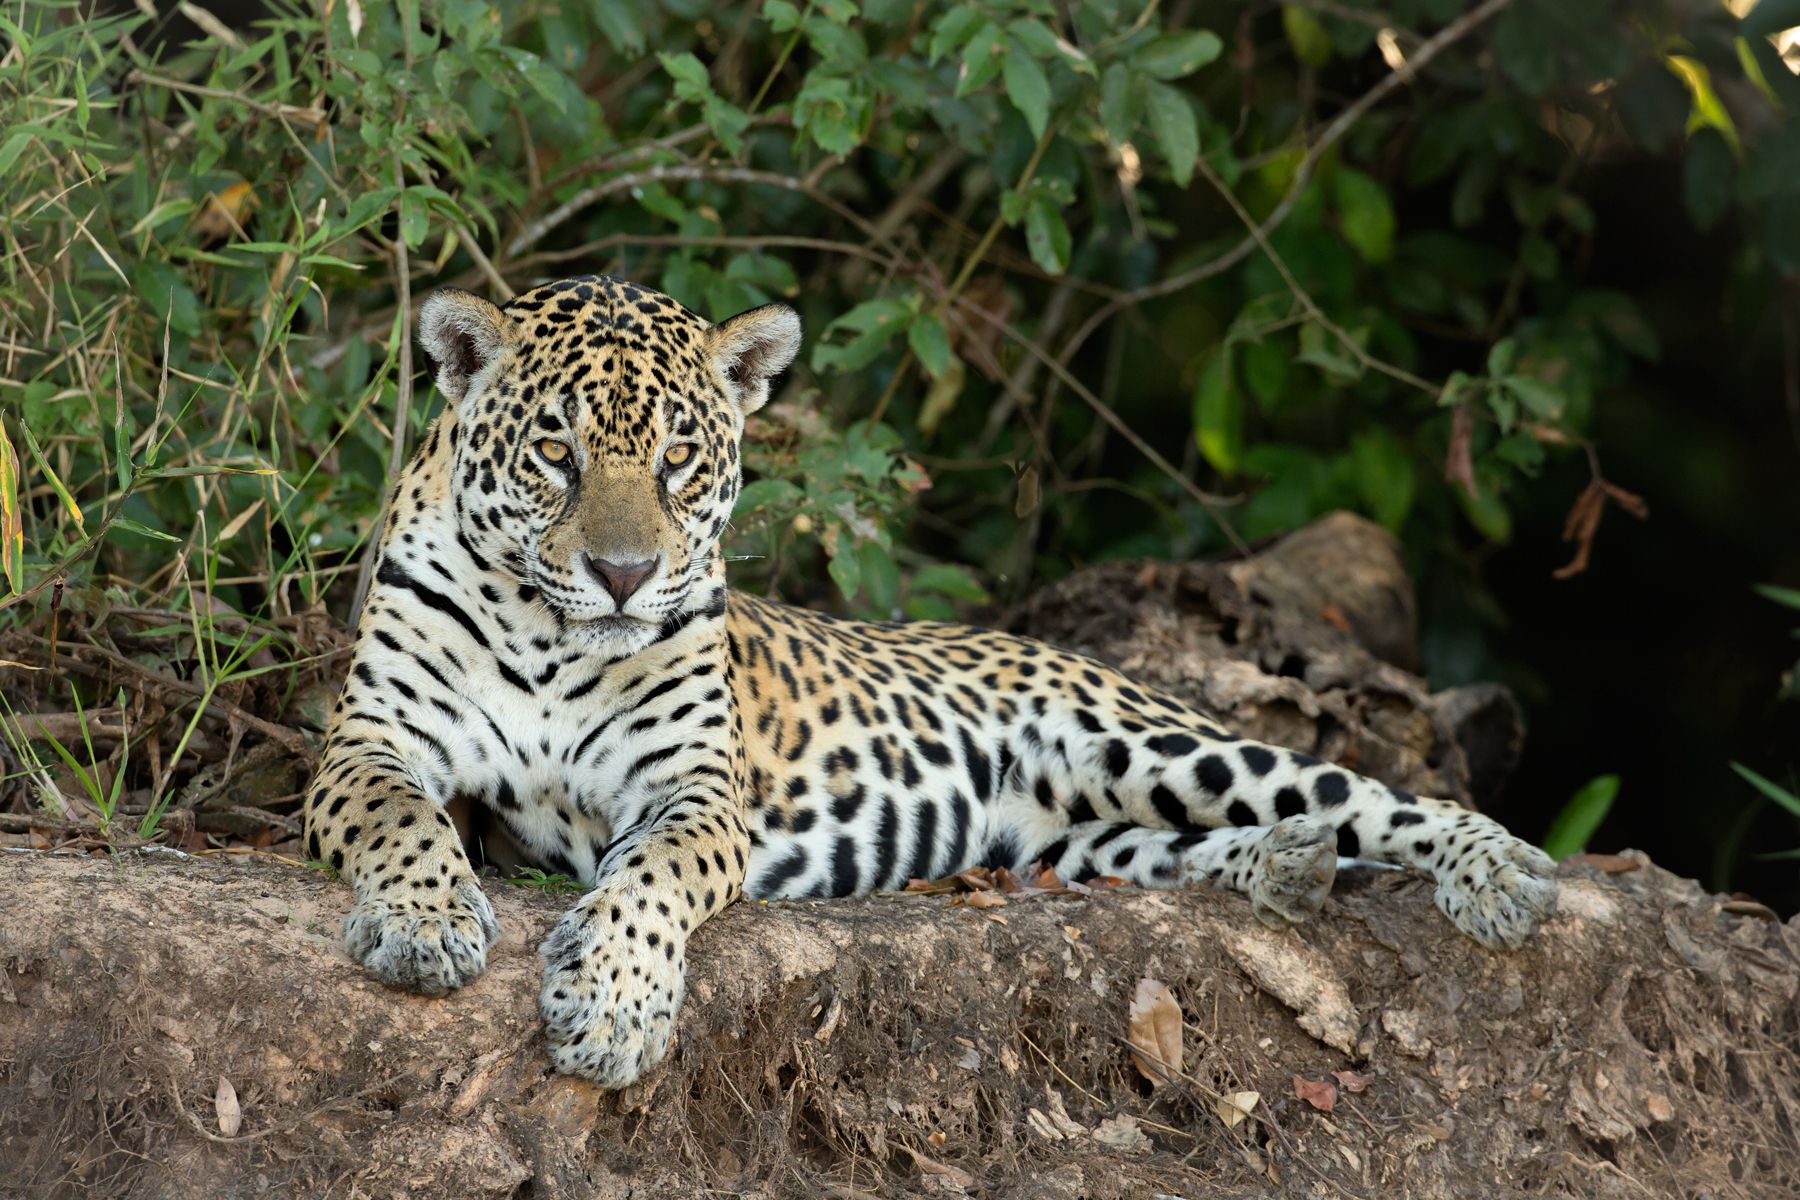 Jaguar in the Pantanal: Photography tours by Mike Watson